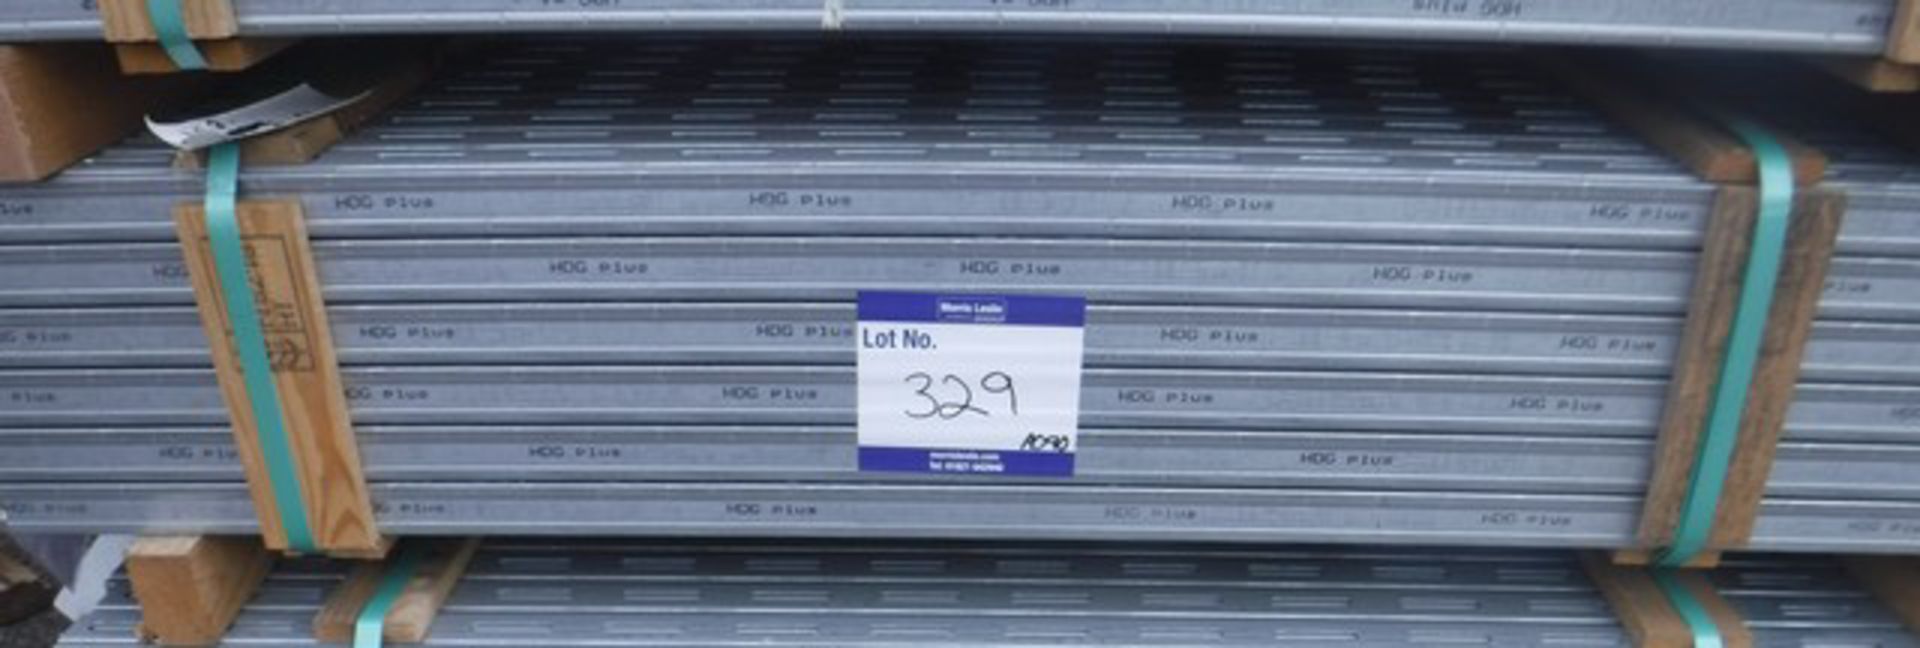 HILTI chanel 1.5m long x 2mm - 108 lengths. New, used in construction for shelving.